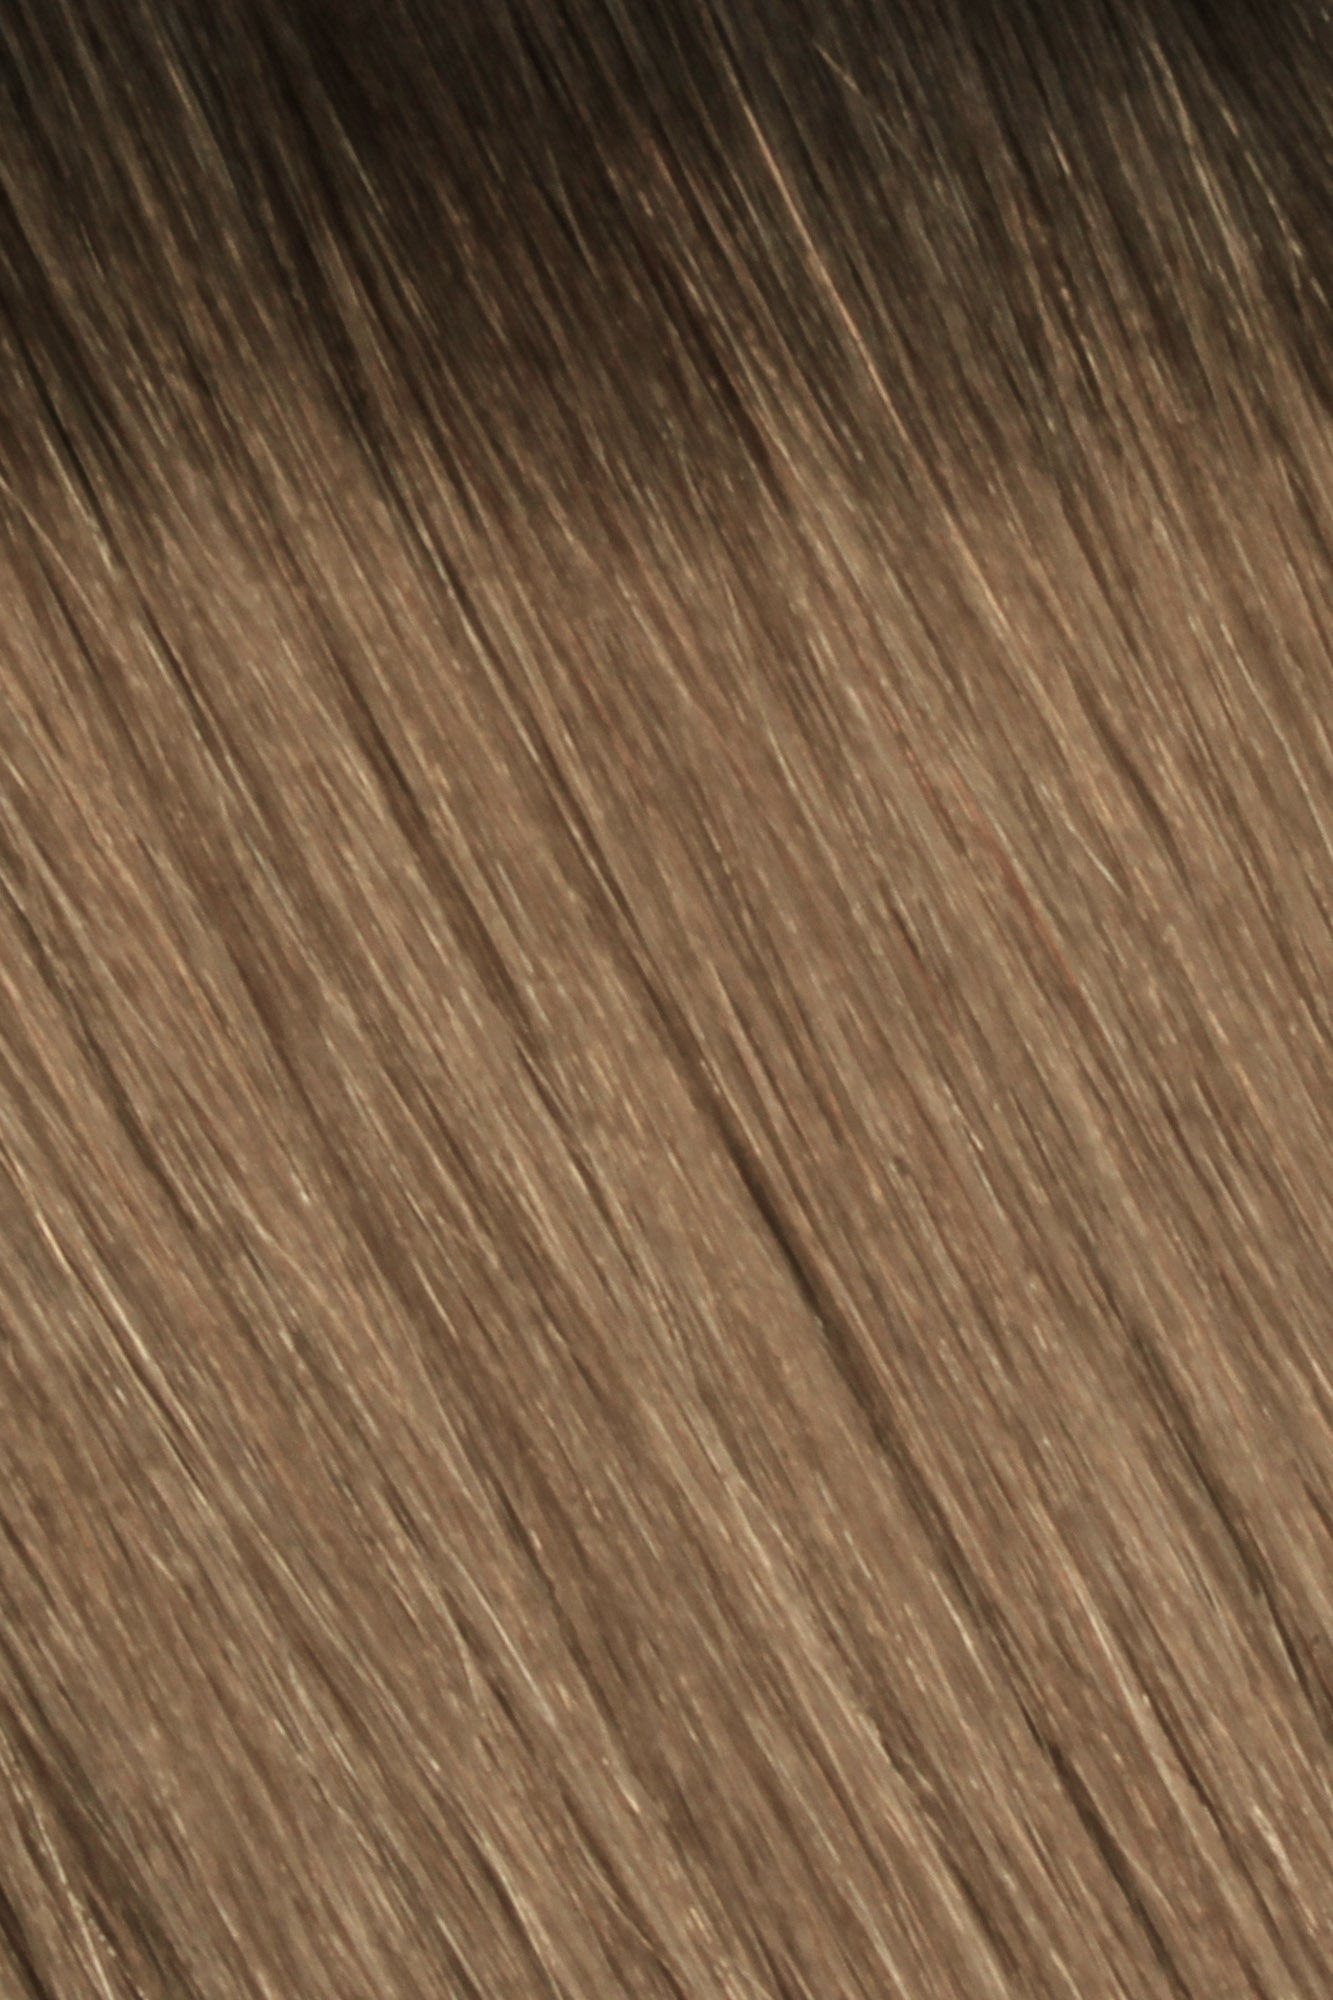 SEAMLESS® Flat Weft 20 Inches - SWAY Hair Extensions Rooted-Sunkissed-Brown-R2-8-10 Natural SEAMLESS® Flat Weft 20 Inches extensions. Thin, flexible, and discreet. 100% Double Drawn Remy Human Hair. Versatile and reusable